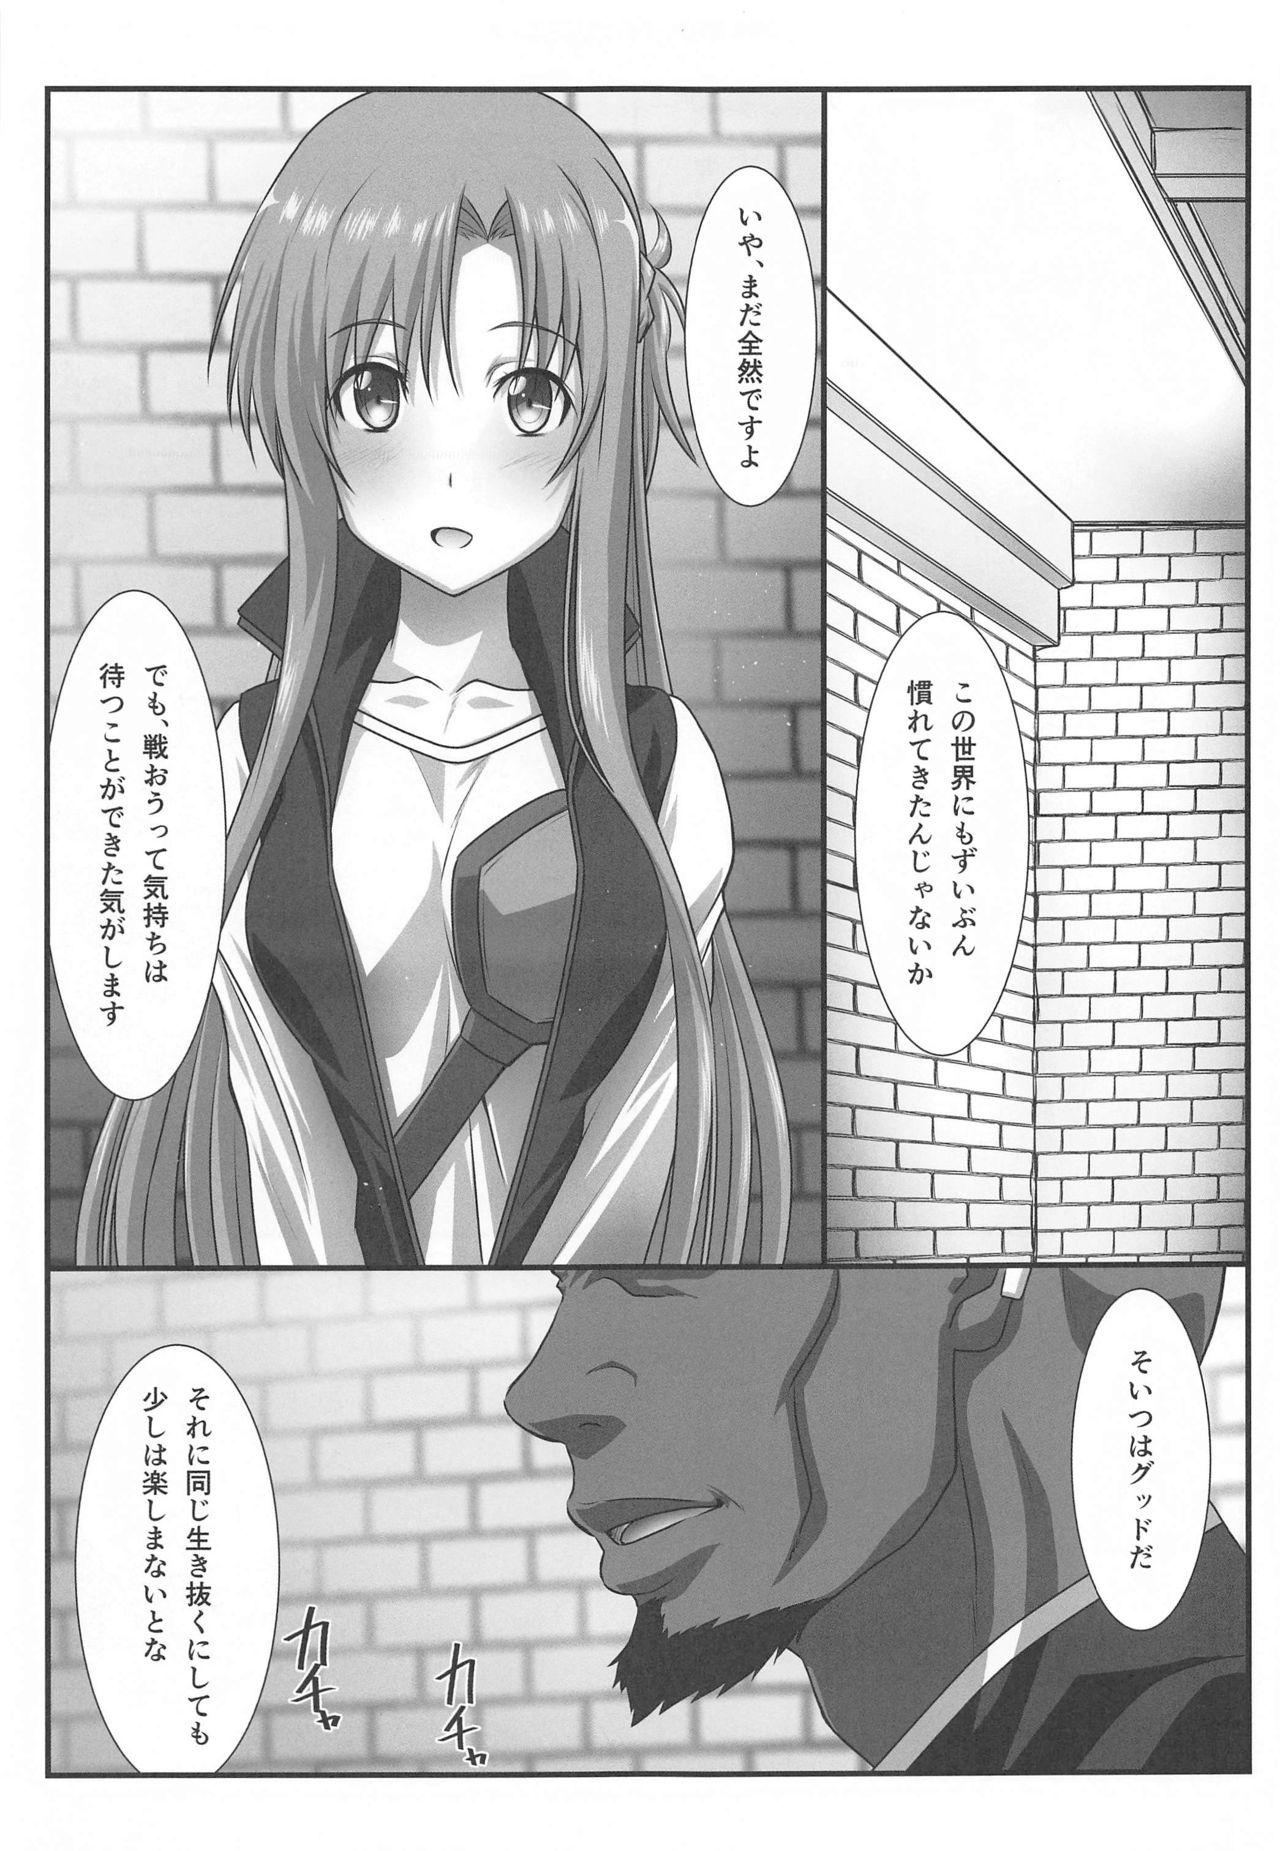 Humiliation Astral Bout Ver. 44 - Sword art online 18yo - Page 8